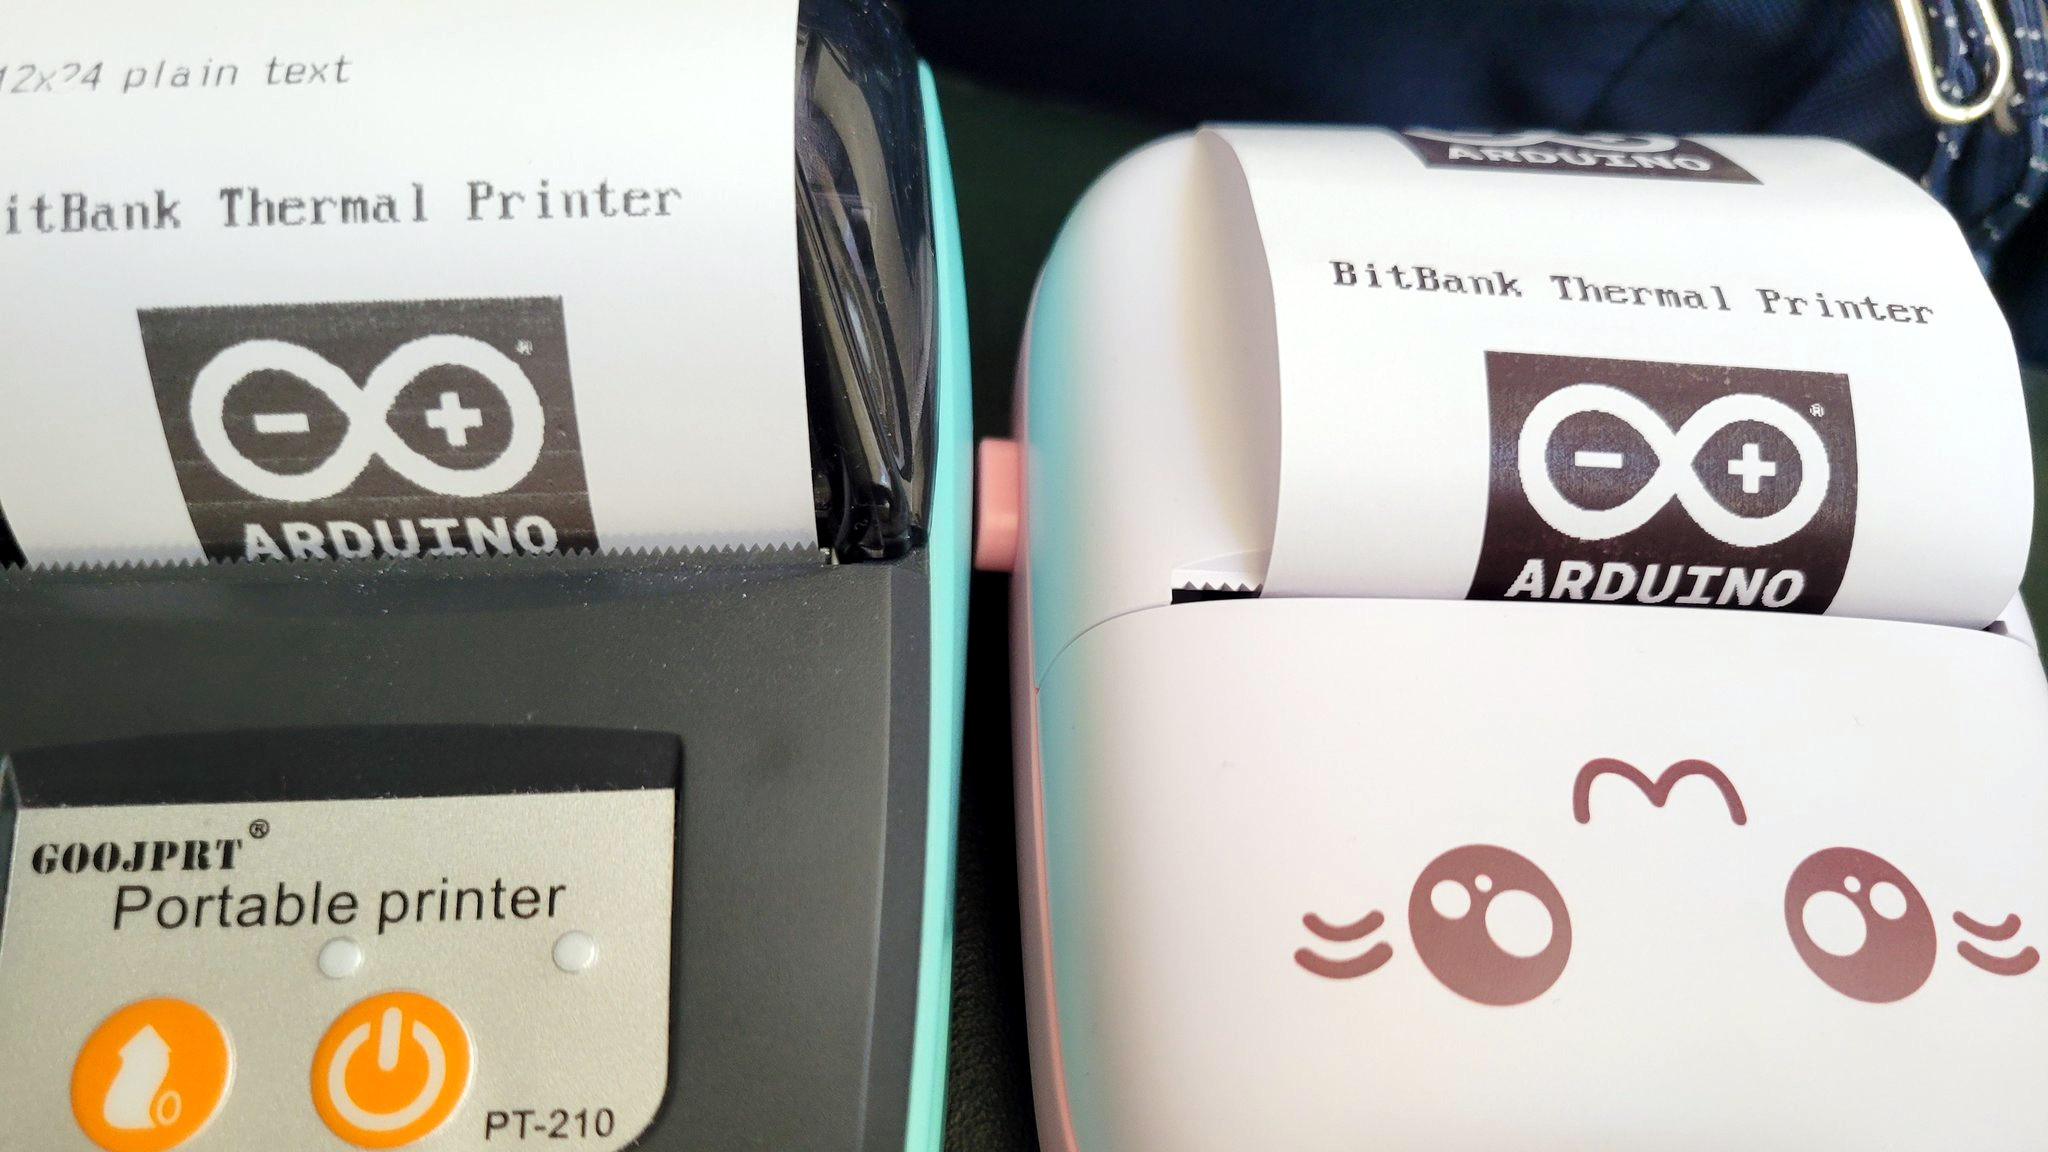 Wireless Thermal Printers Get Arduino Library (and App) Hackaday